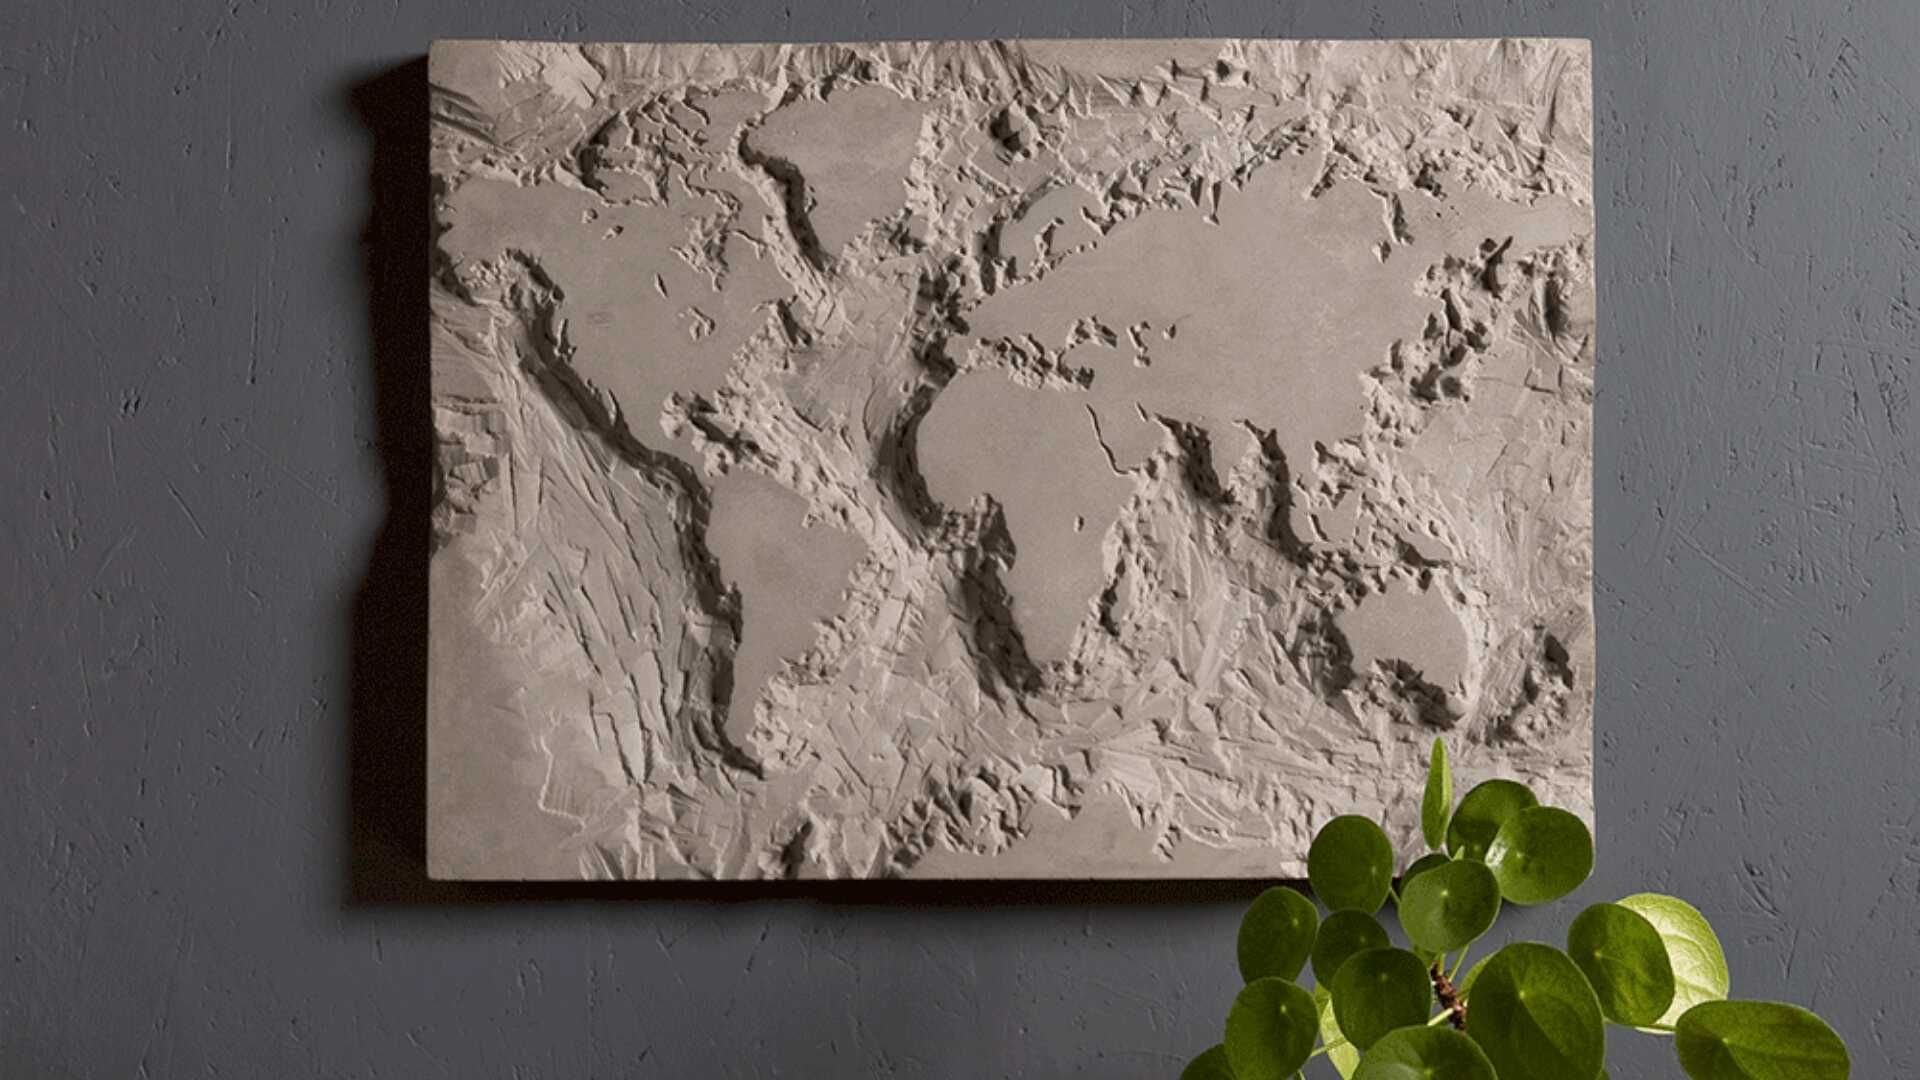 Concrete And Design Wall Art Ideas Online Shop | Sedie (View 5 of 15)